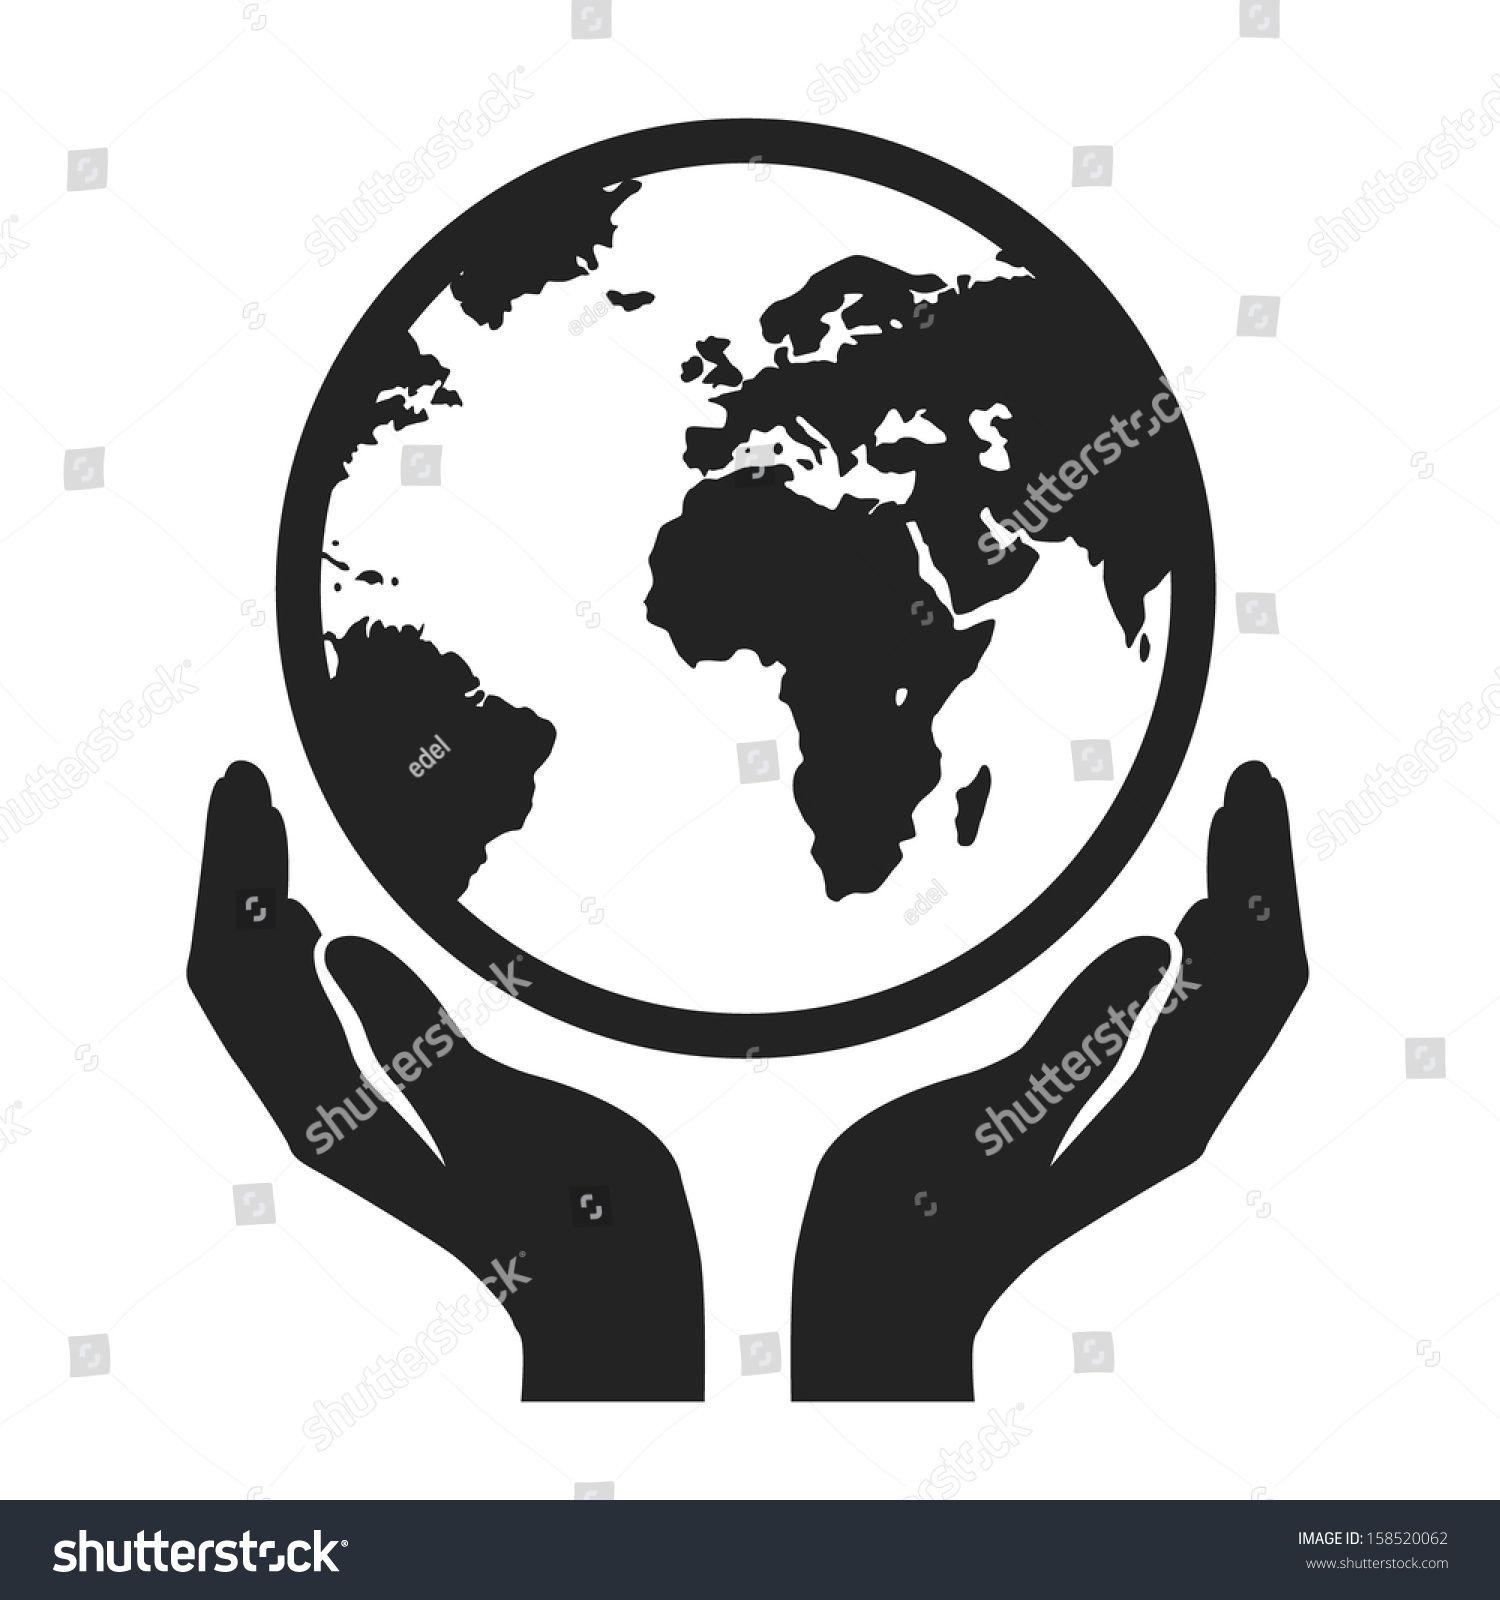 Hands Holding Globe Logo - hands holding globe earth web black icon. save earth concept vector ...